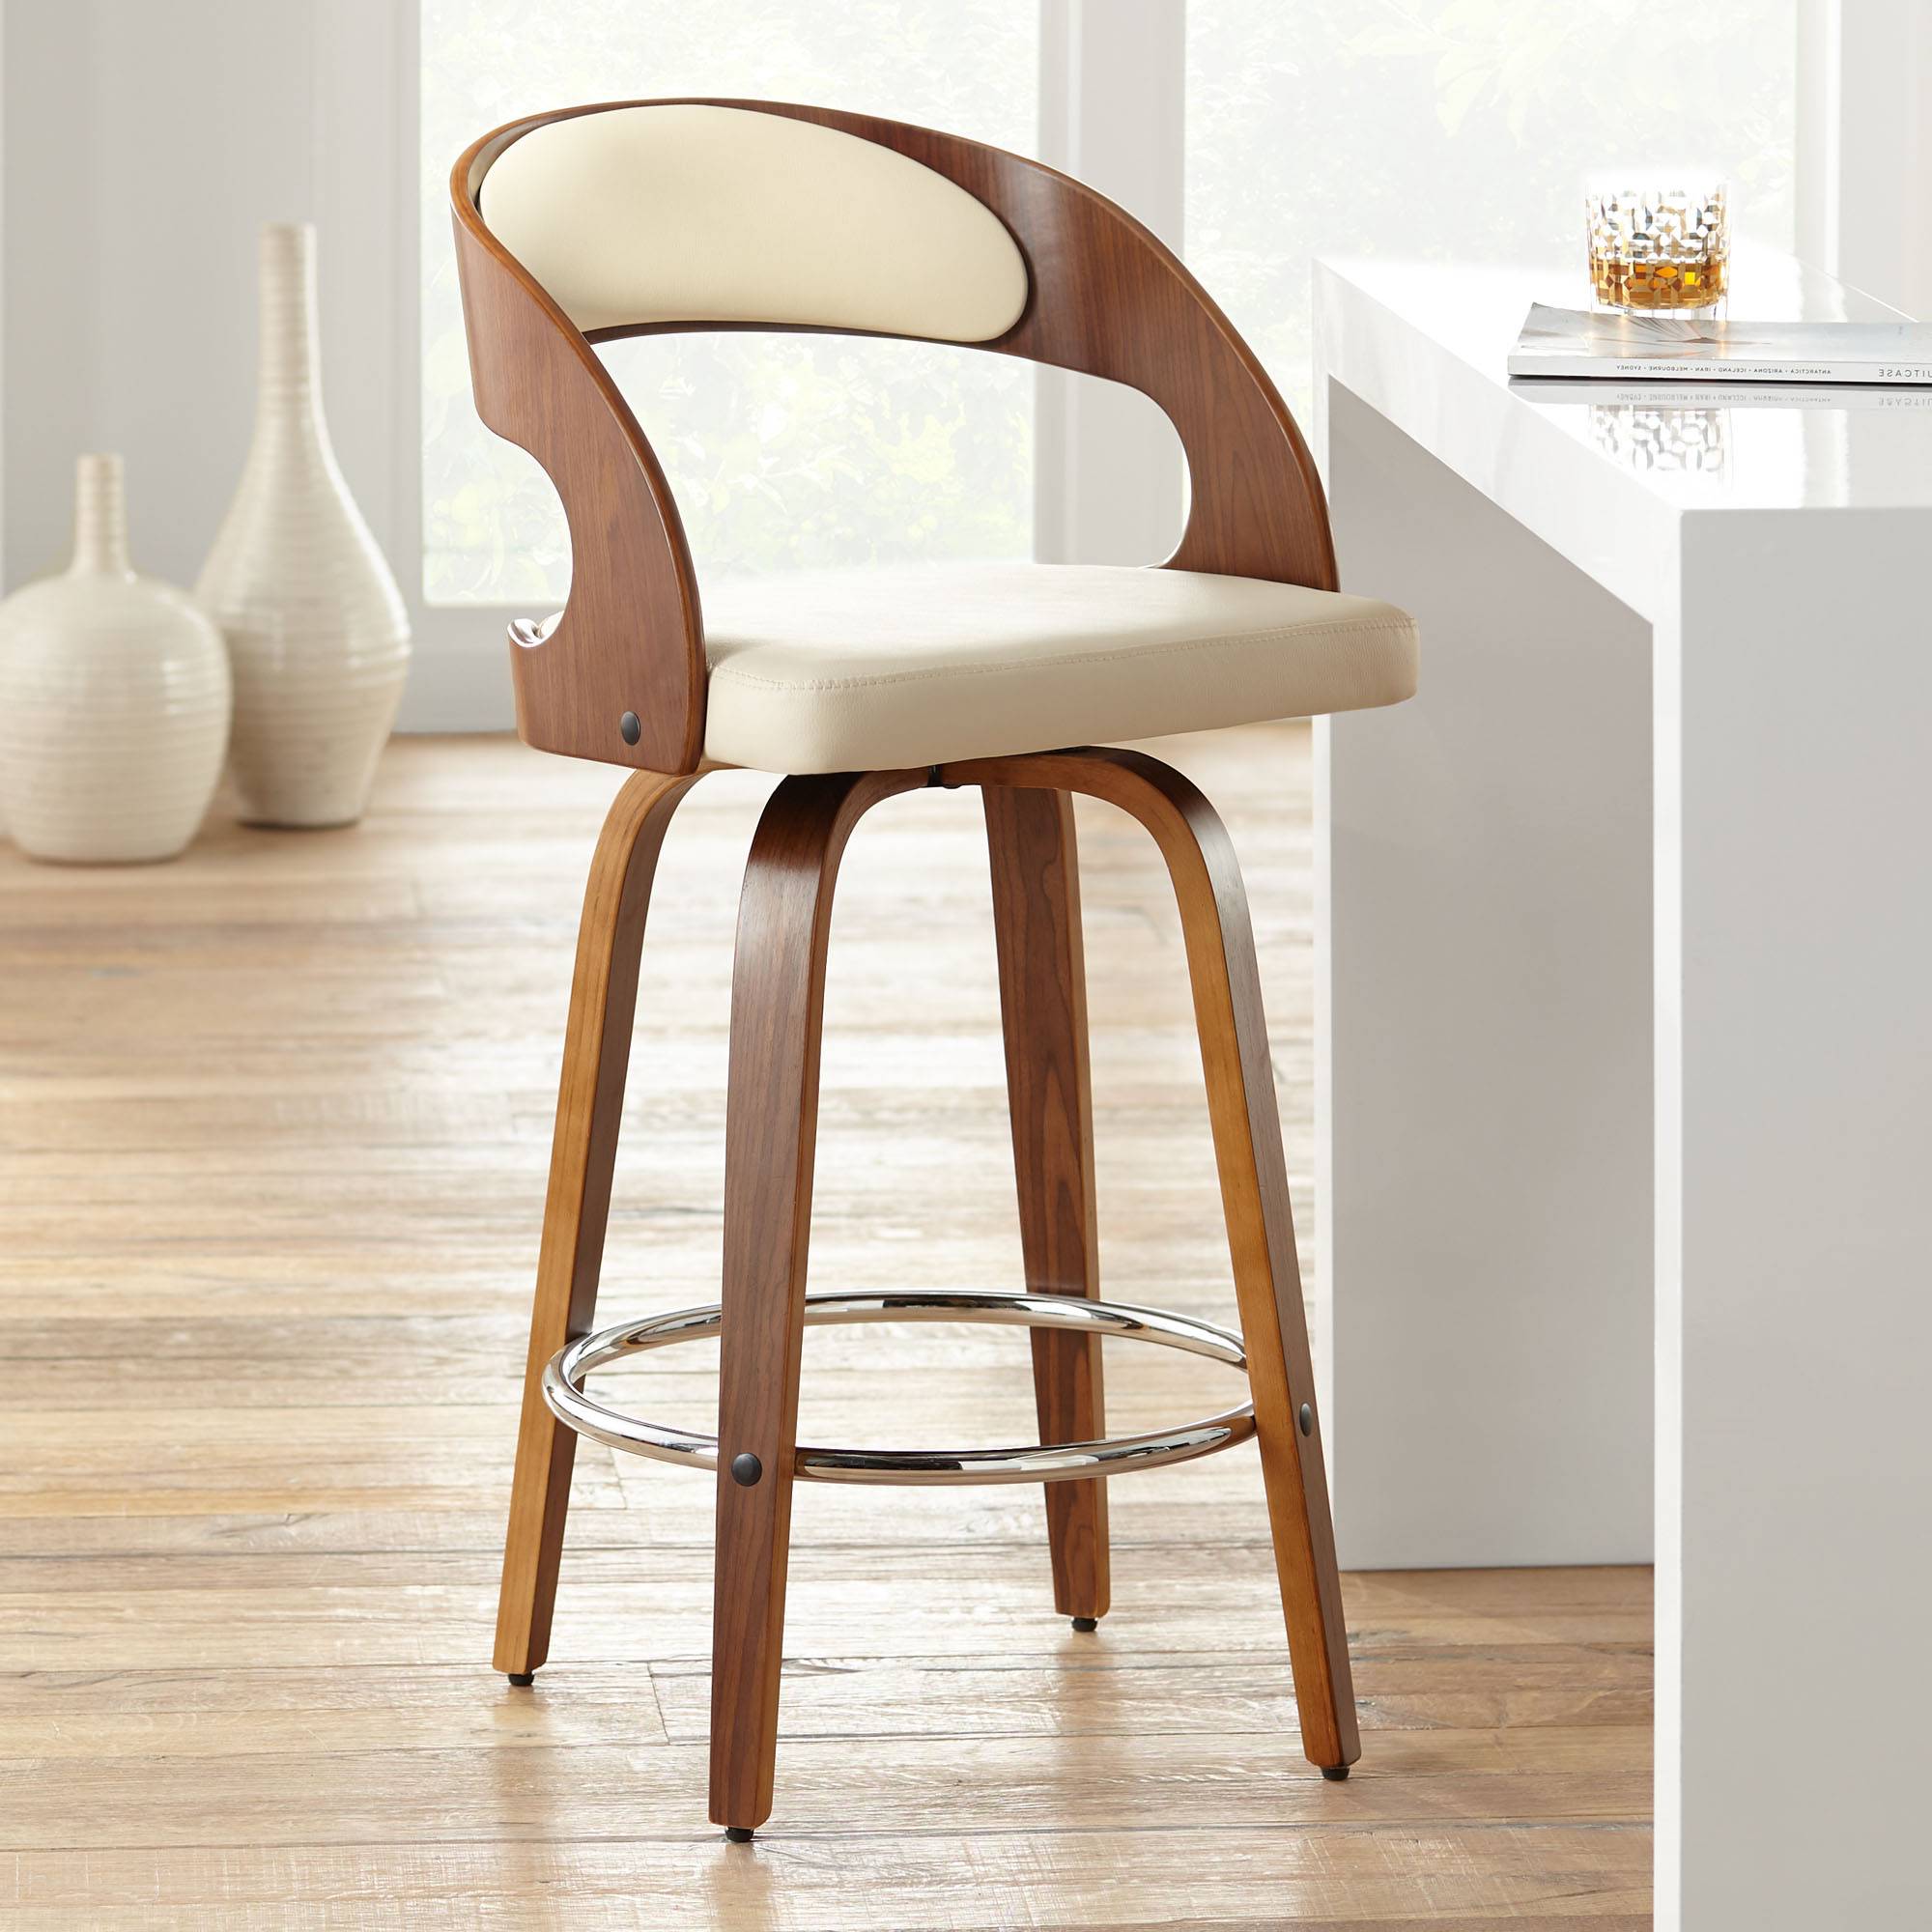 Shelly 25 34 Cream Faux Leather Swivel Counter Stool Ebay